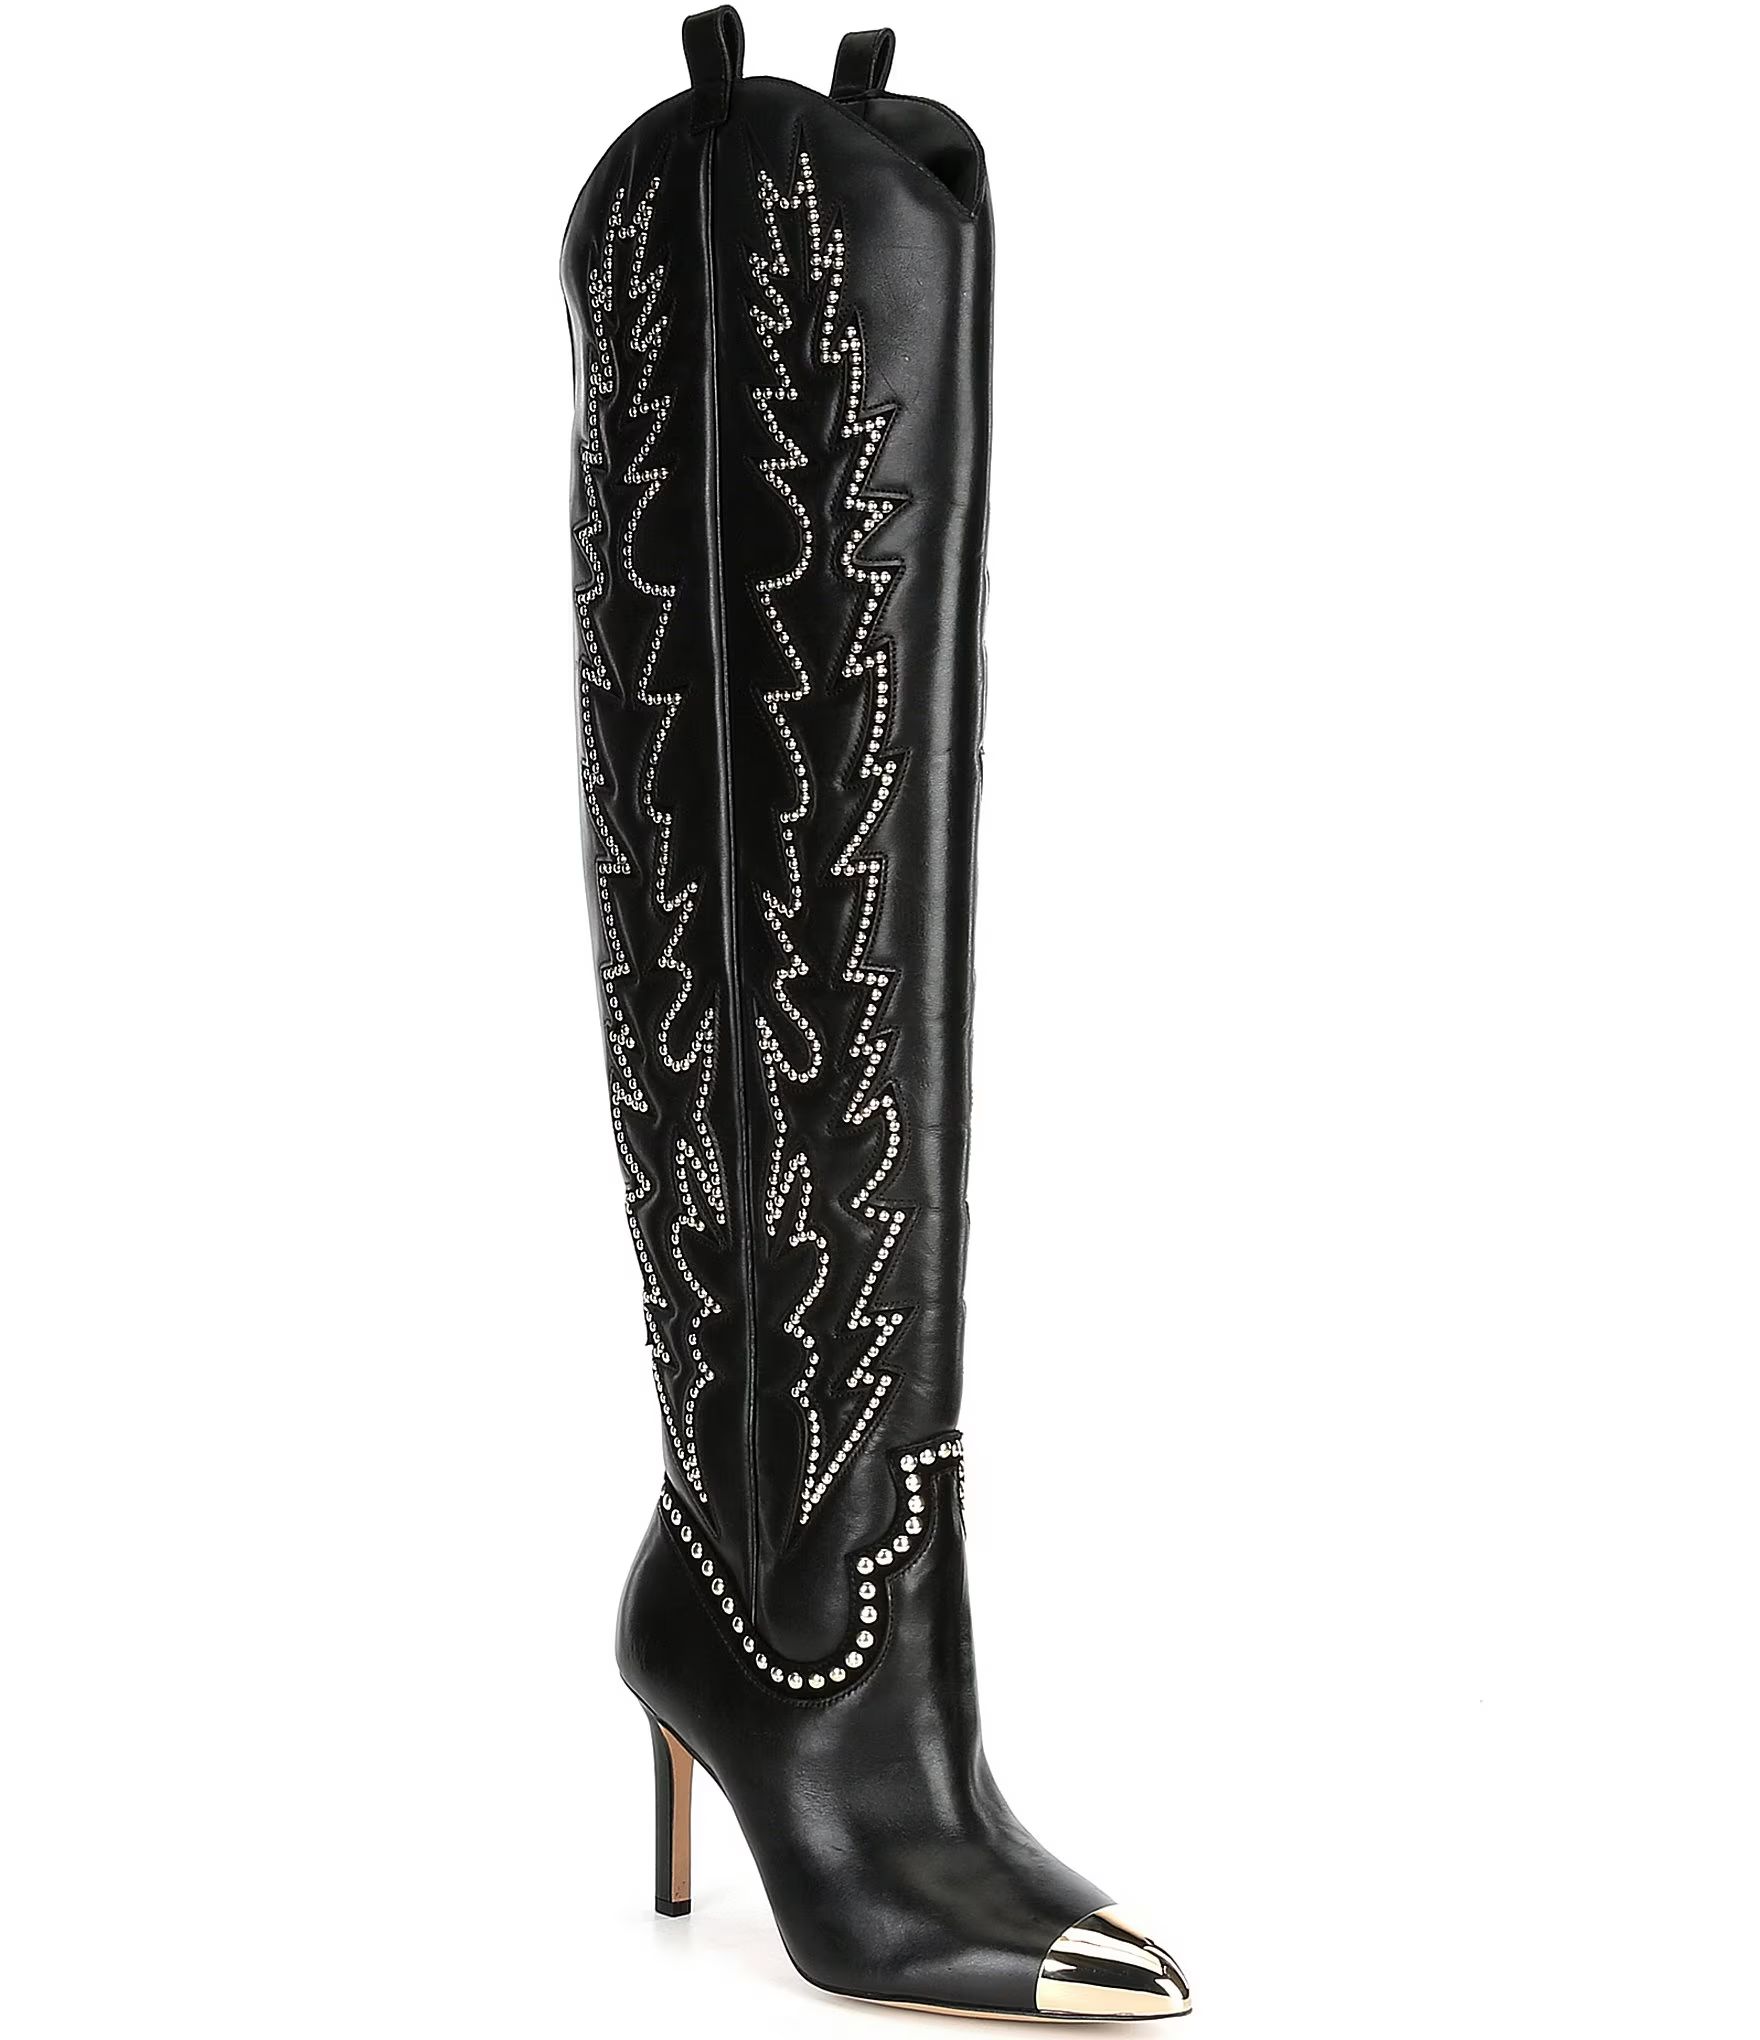 Katerina Leather Studded Over-the-Knee Western Dress Boots | Dillard's